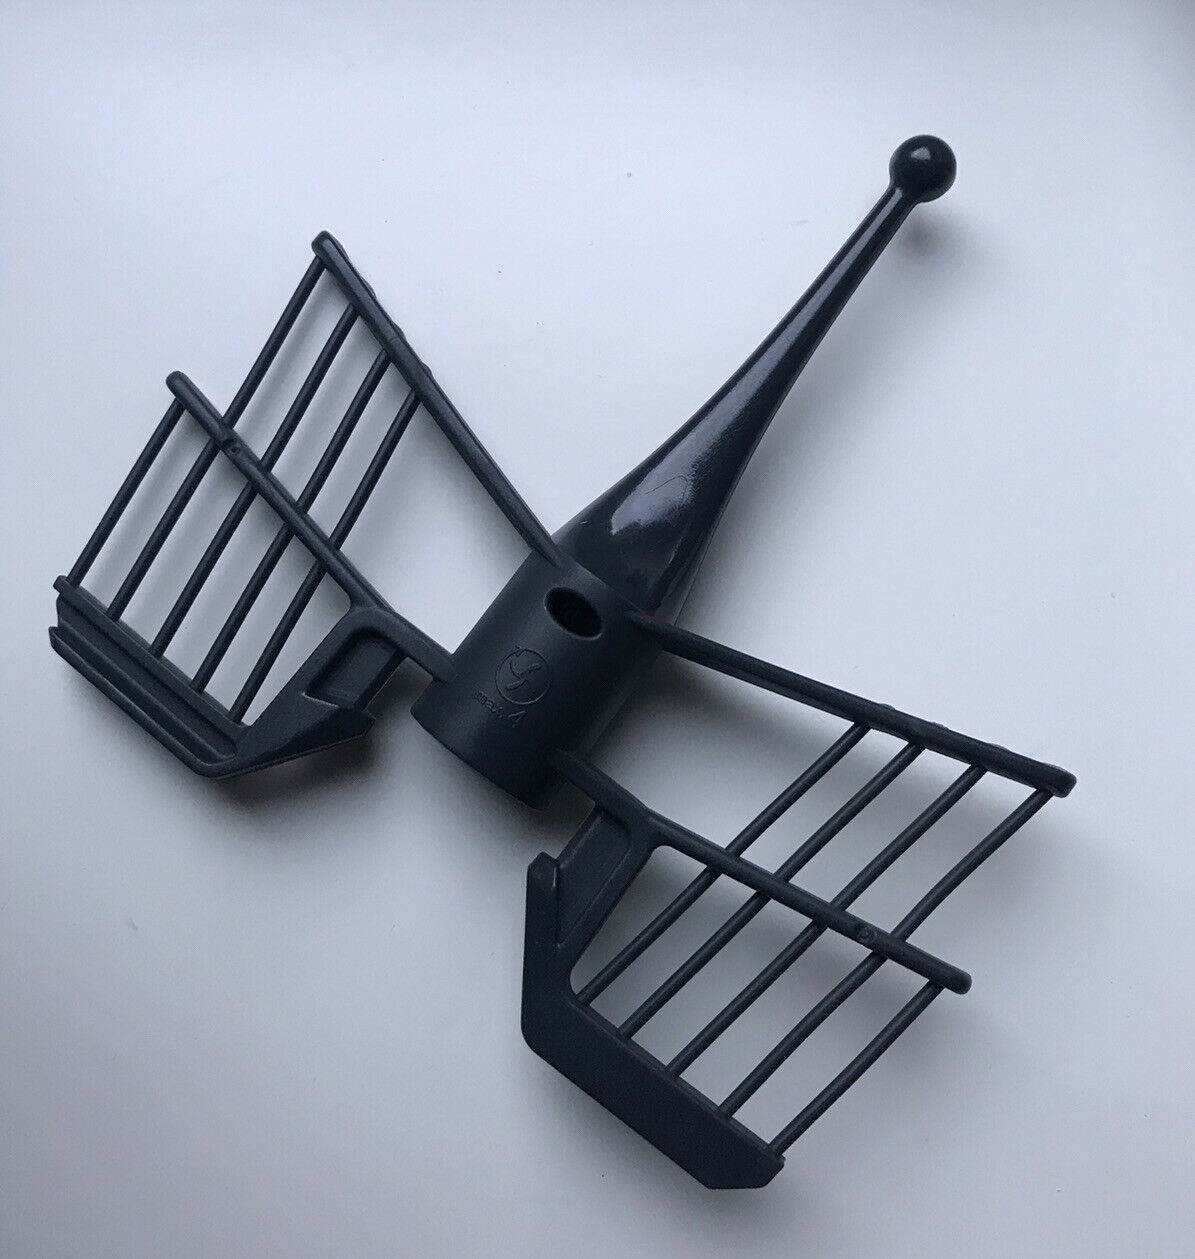 TM31/TM5 Series Stand Mixer Butterfly Rods Applicable to Thermomix Beauty Products Multi-Purpose Accessories